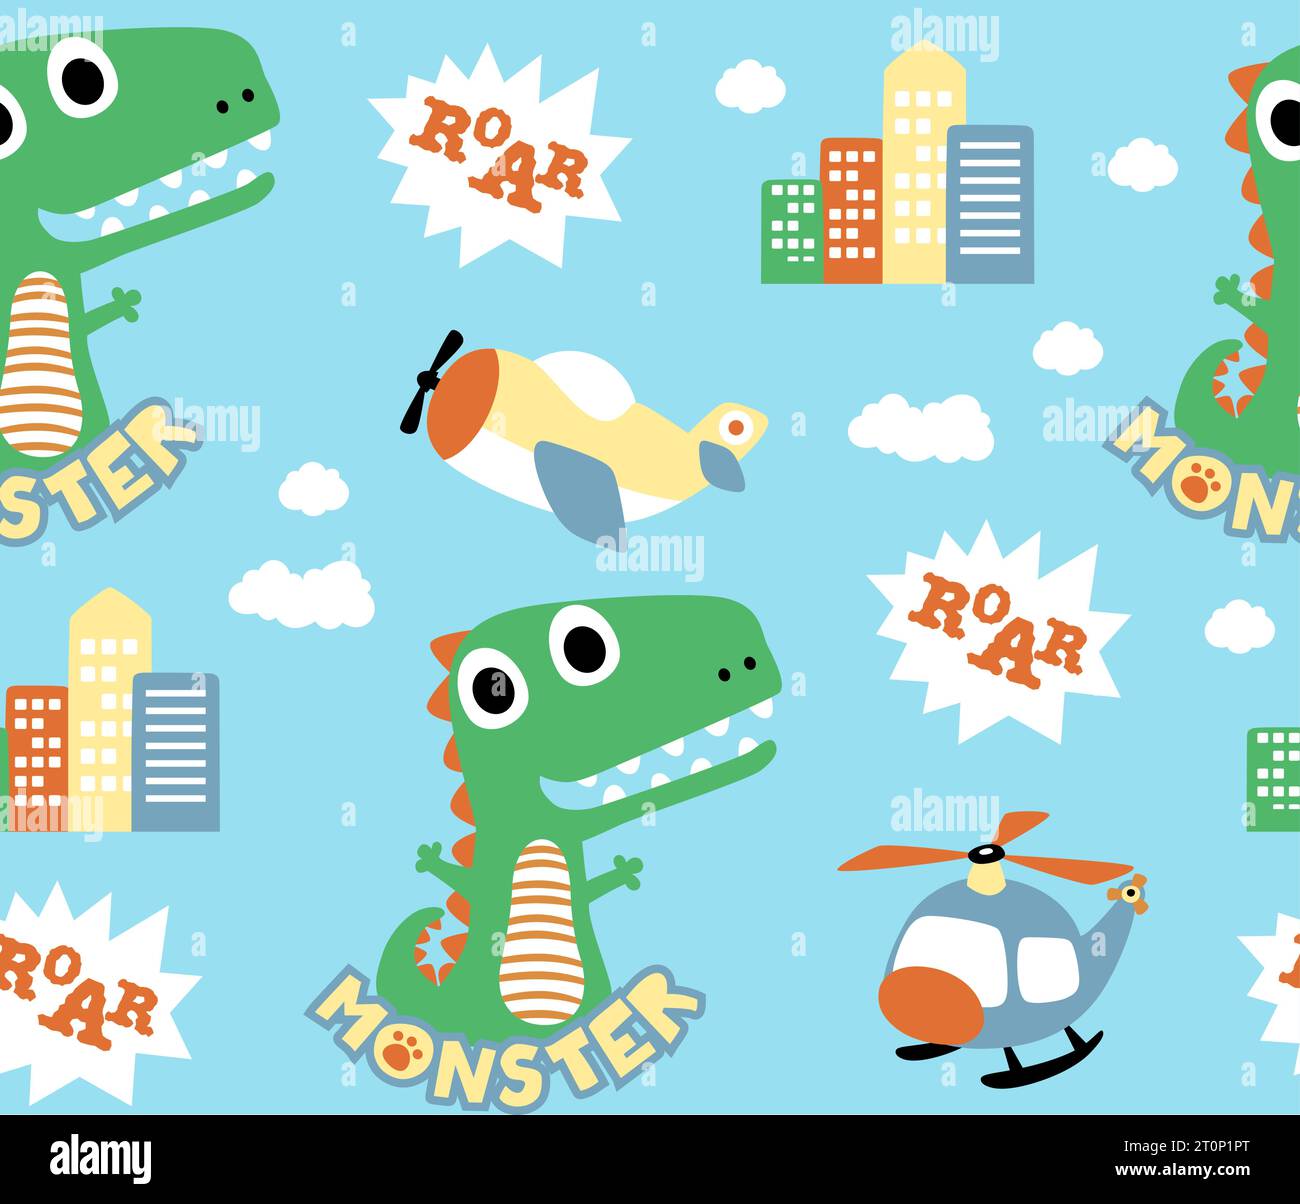 seamless pattern vector of cartoon monster with aircraft and buildings Stock Vector